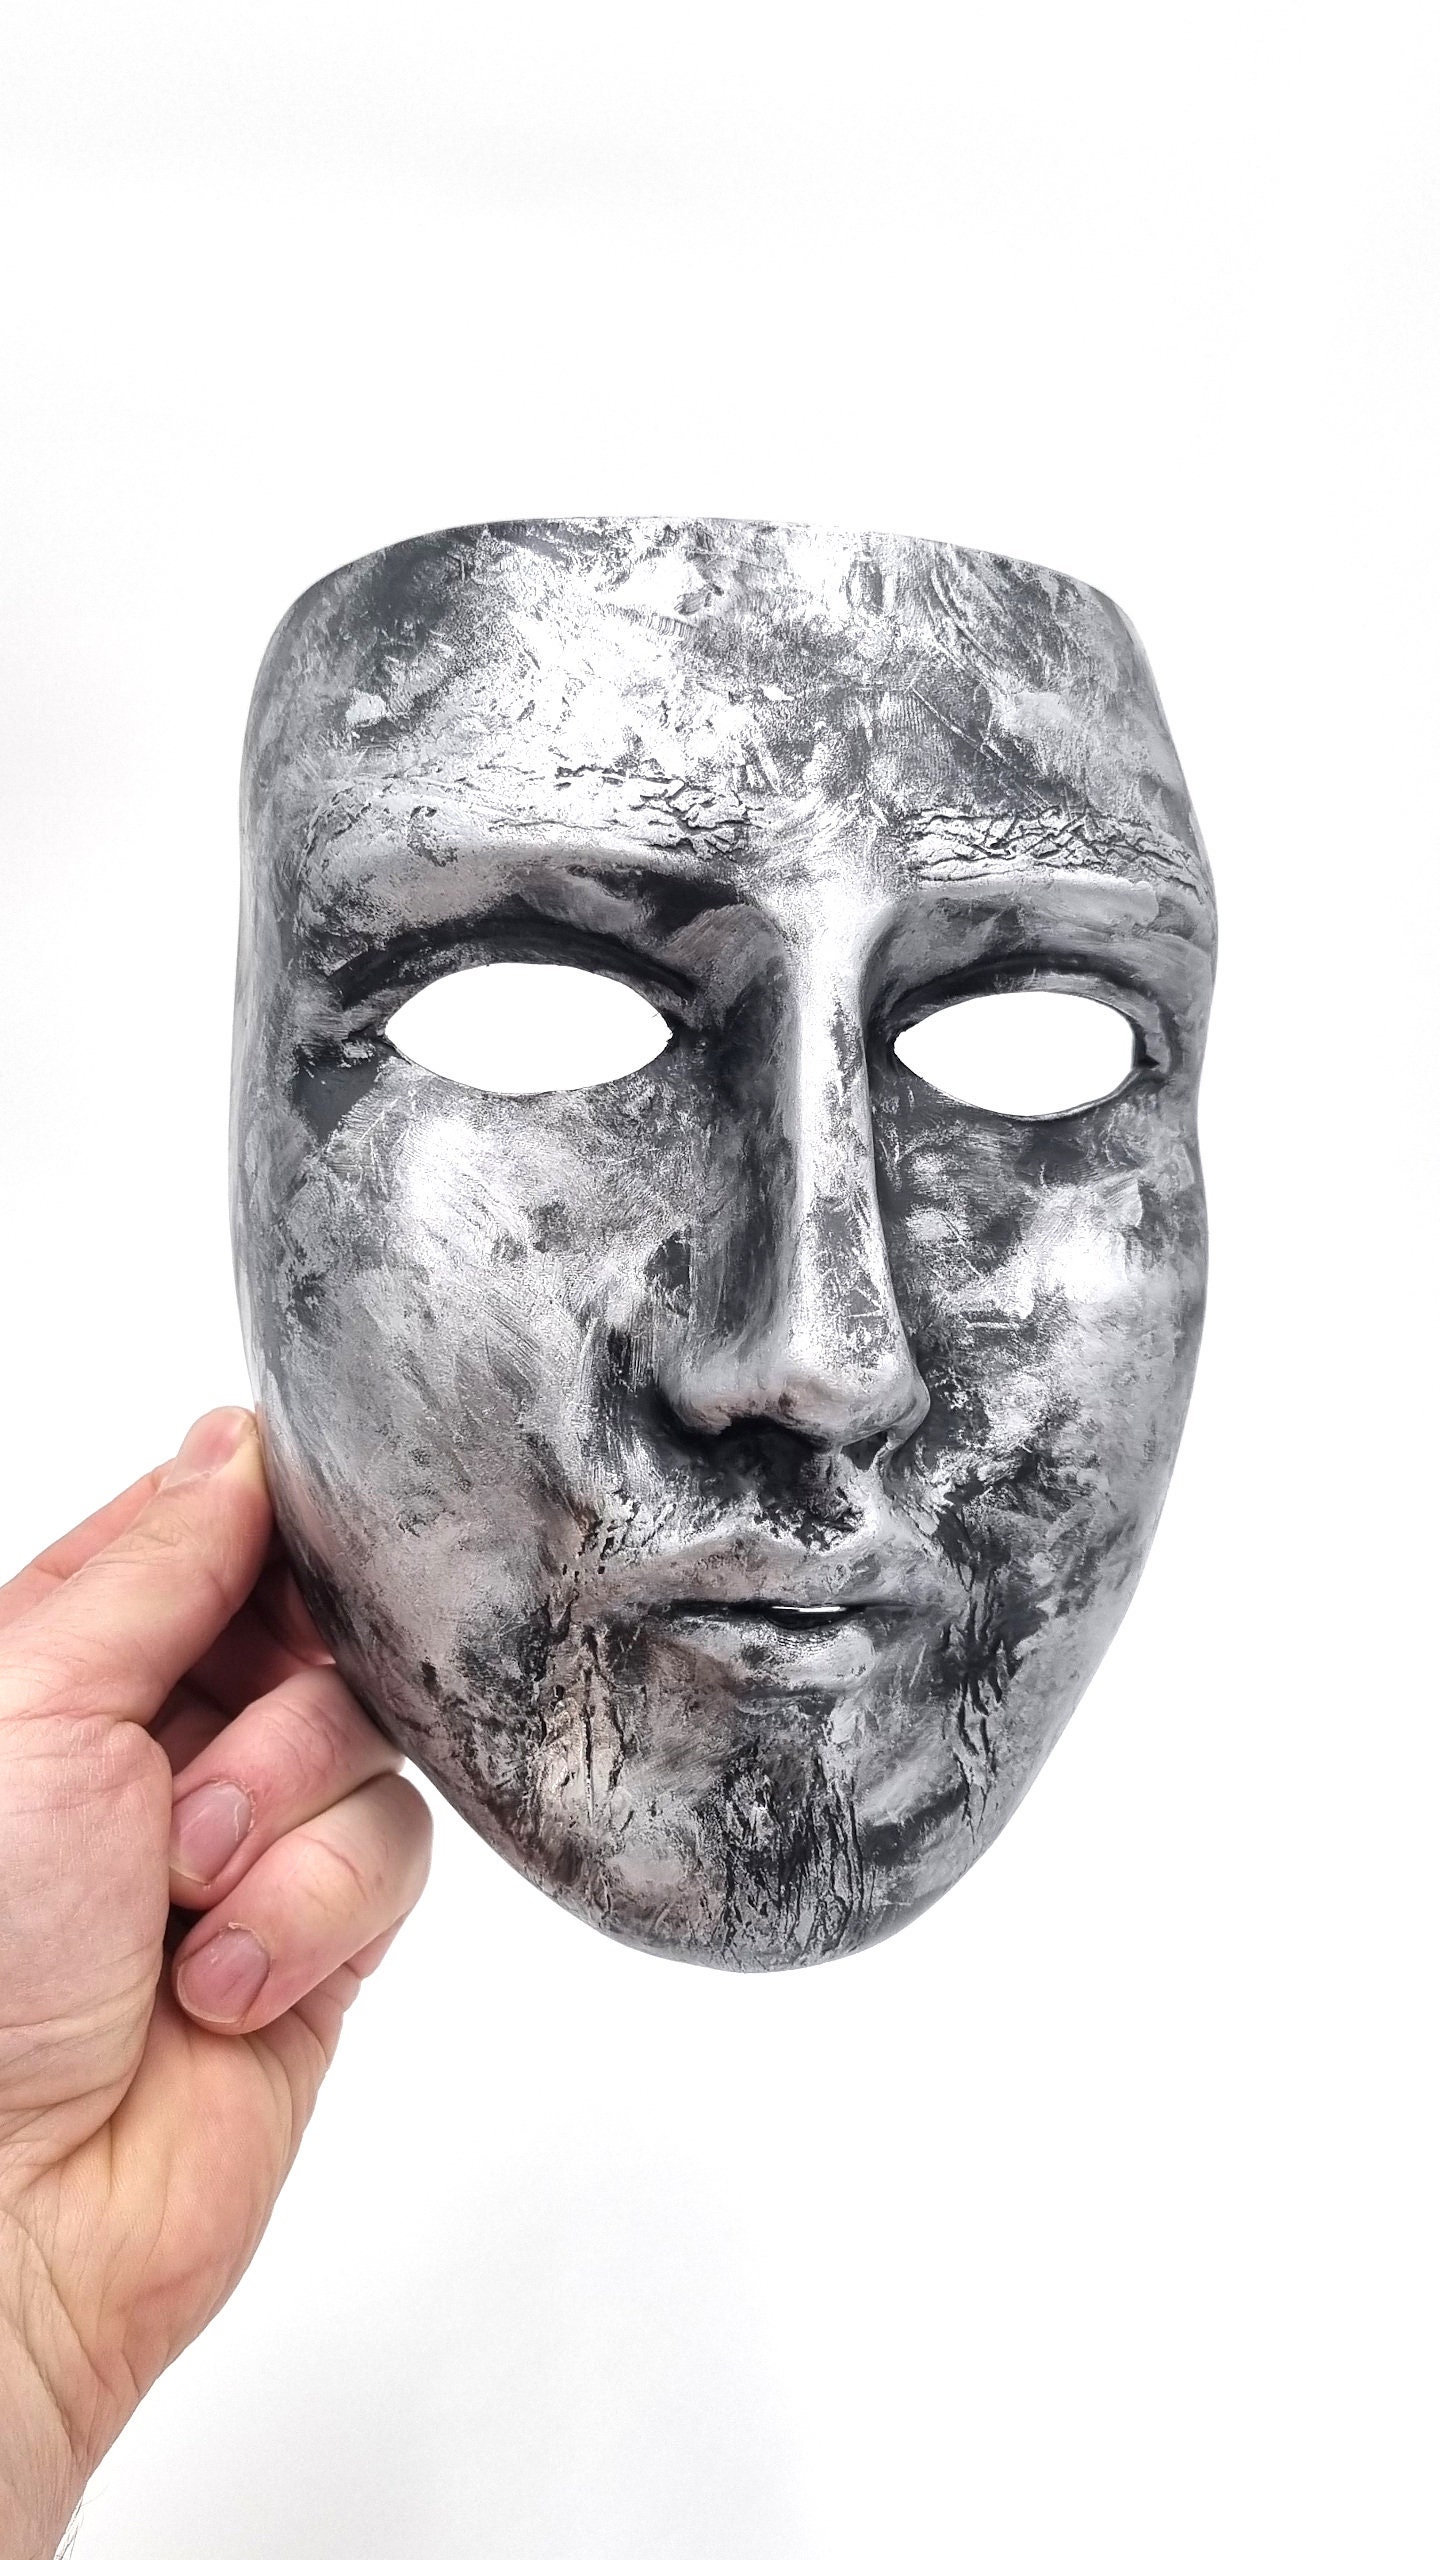 Did King Baldwin IV ever wear a mask? - Quora